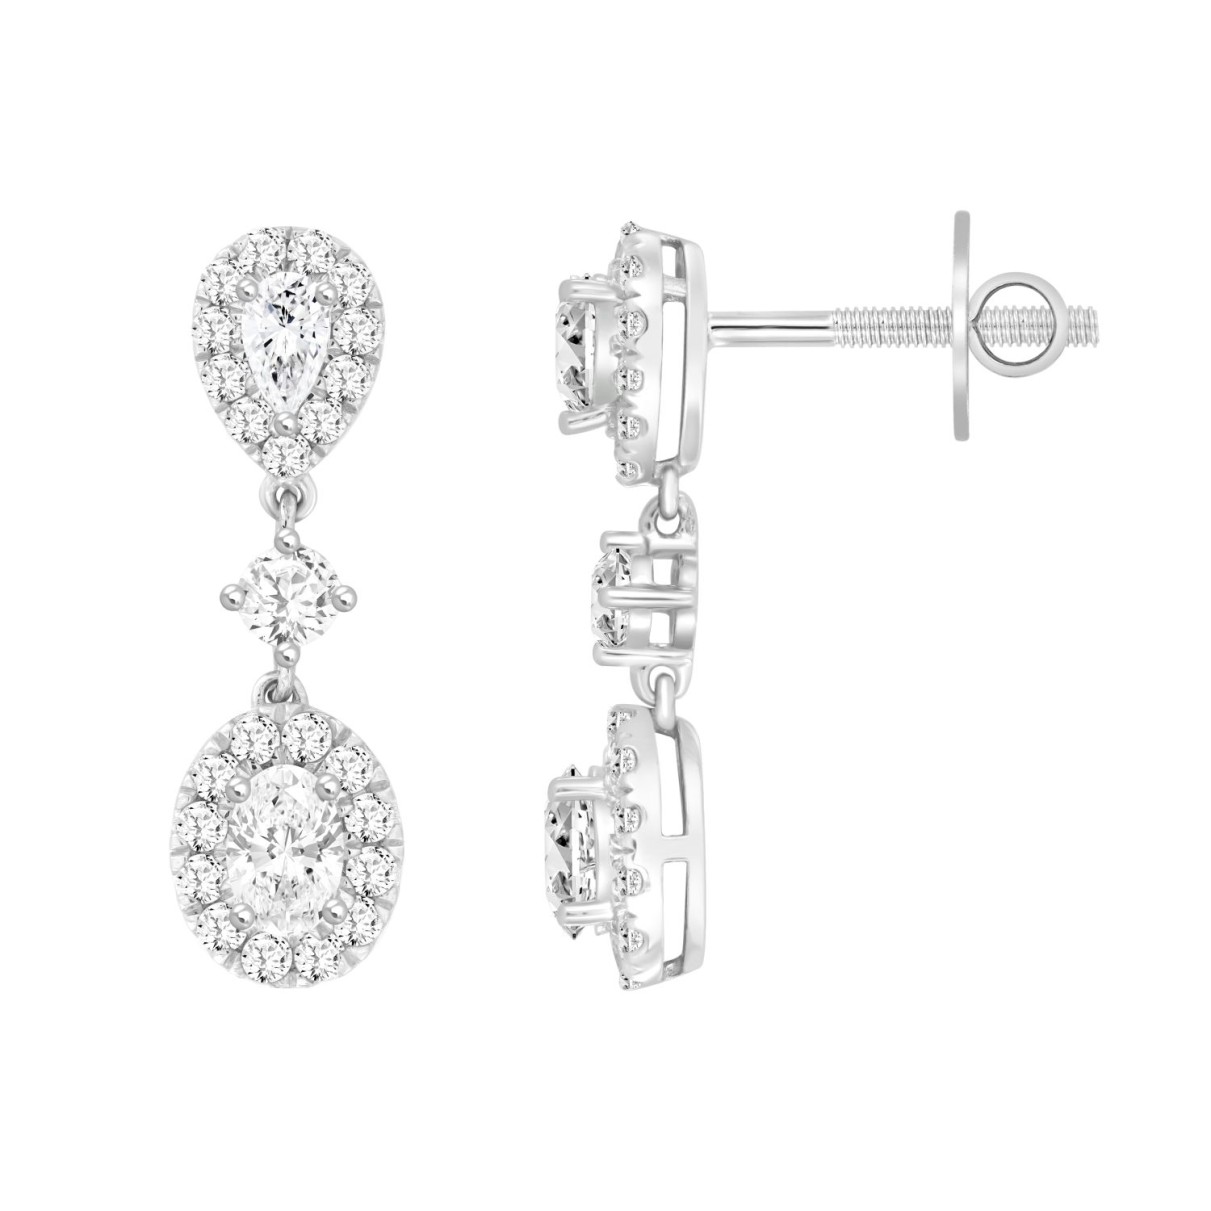 LADIES  EARRINGS 2 3/4CT ROUND/OVAL/PEAR DIAMOND 14K WHITE GOLD